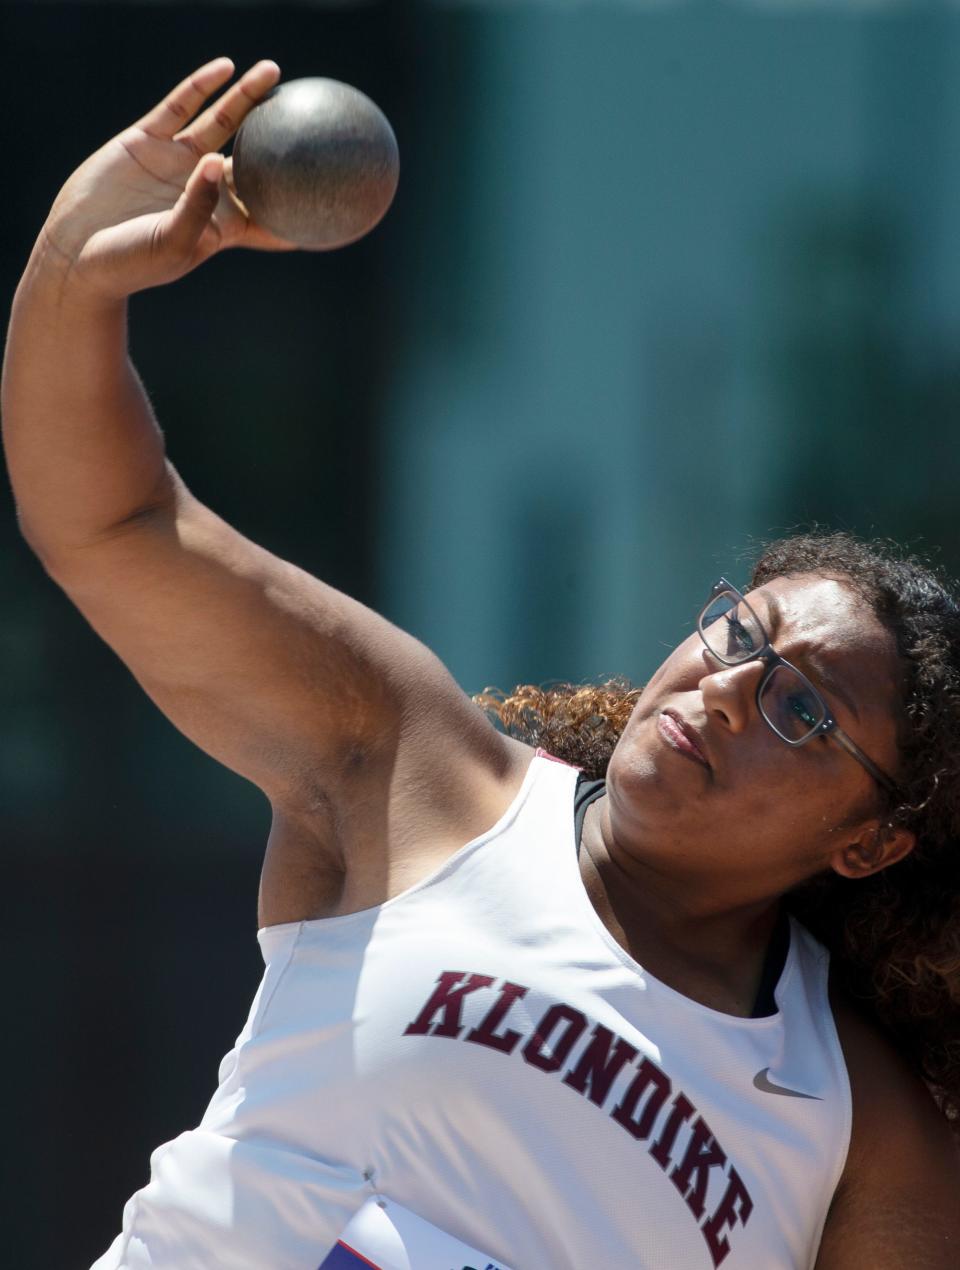 Lamesa Klondike's Neihmaya Howard competes in the Class 1A shot put during the UIL State Track and Field meet, Saturday, May 14, 2022, at Mike A. Myers Stadium in Austin.